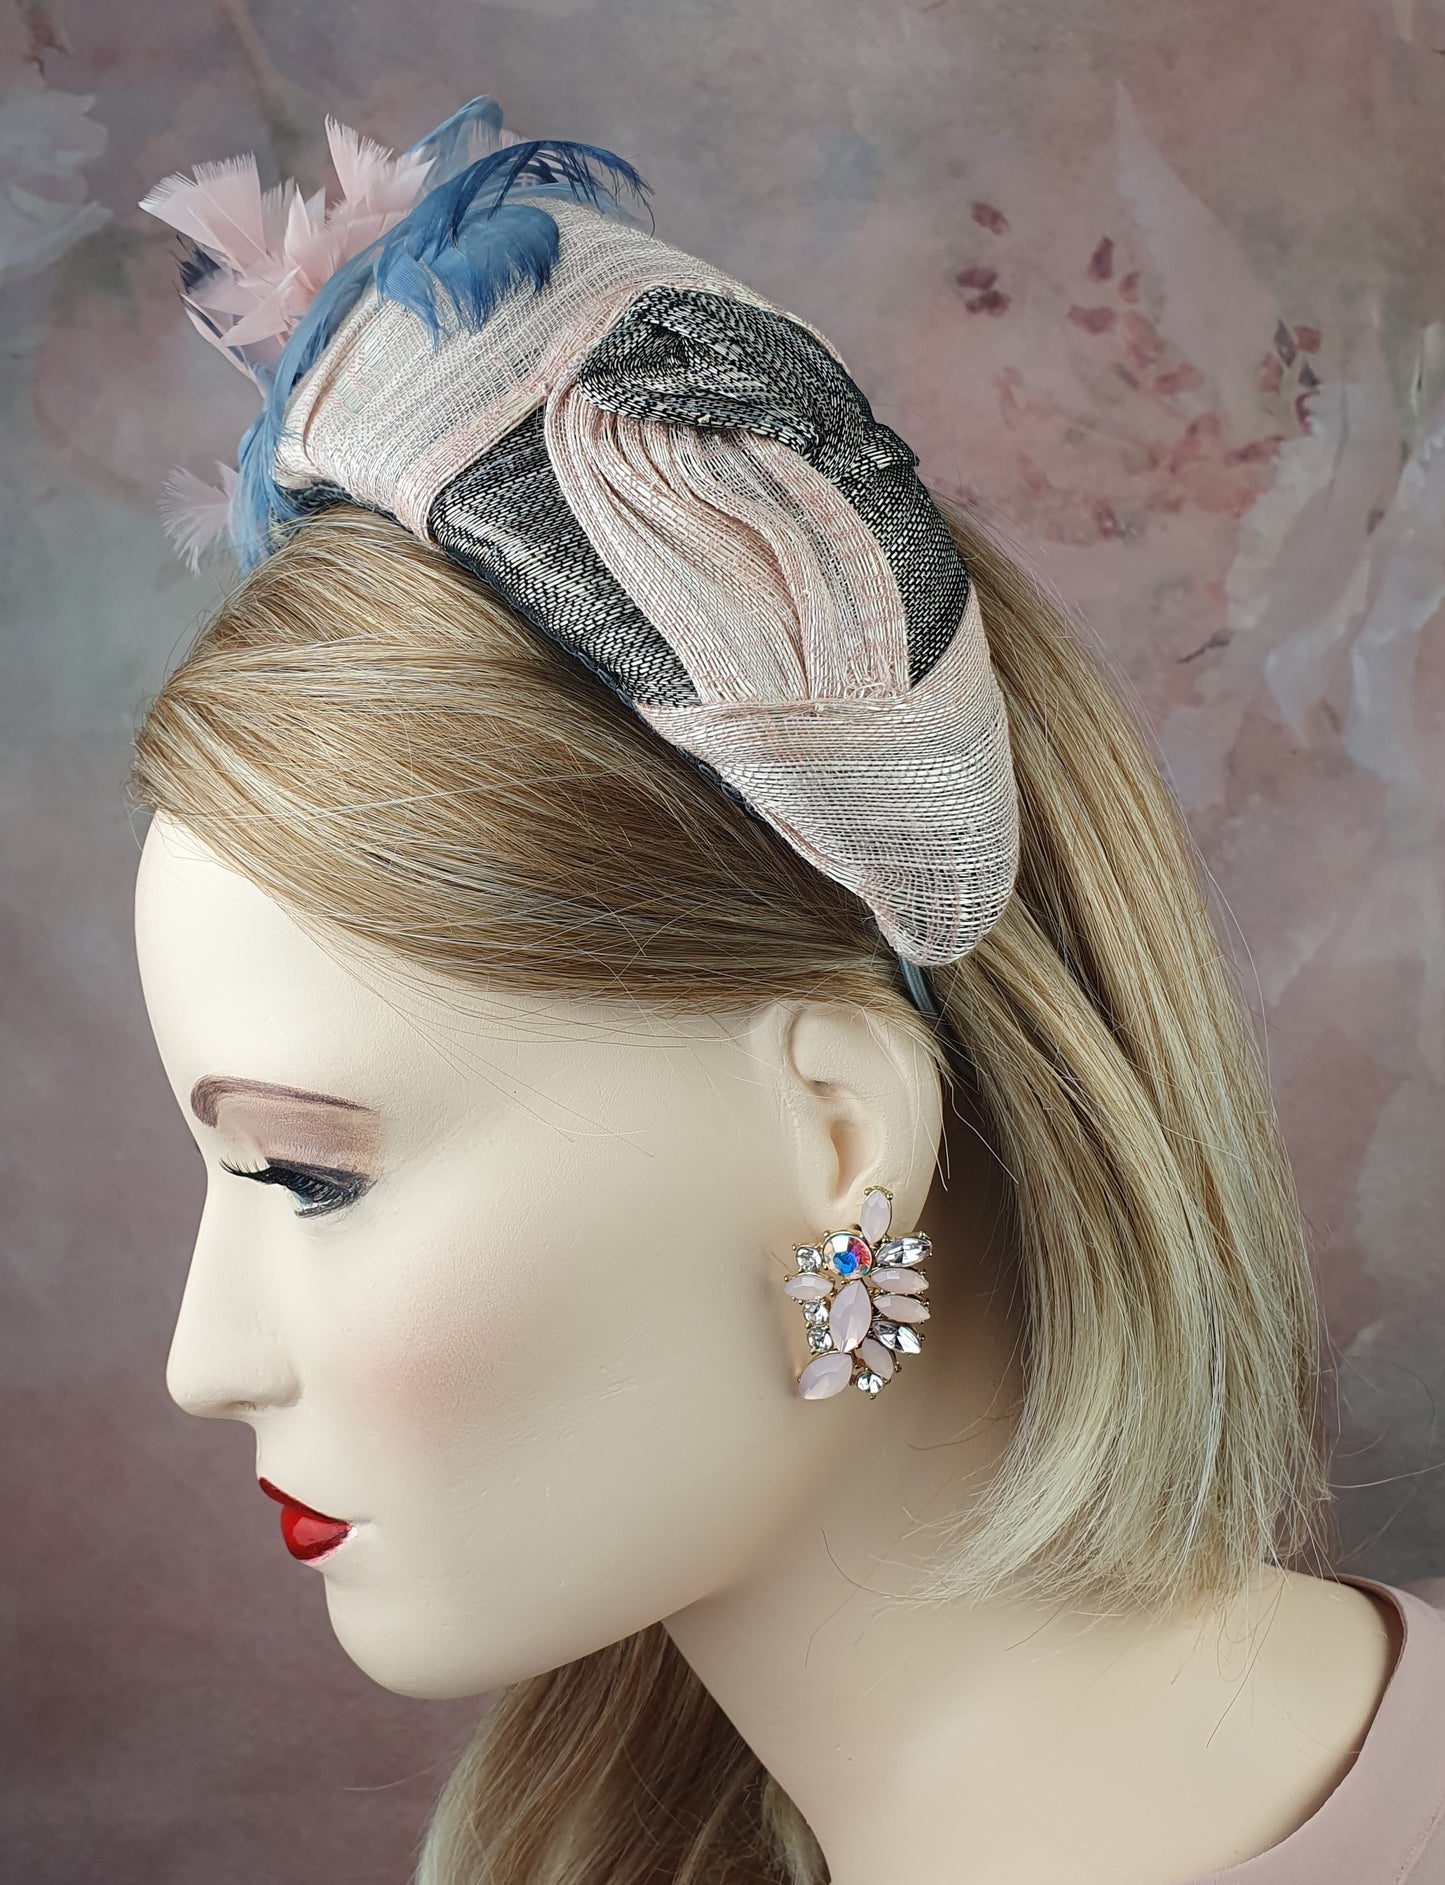 Handmade headband pink and gray made of silk abaca, decorated with swan feathers, beautiful tiara for a special event or occasion